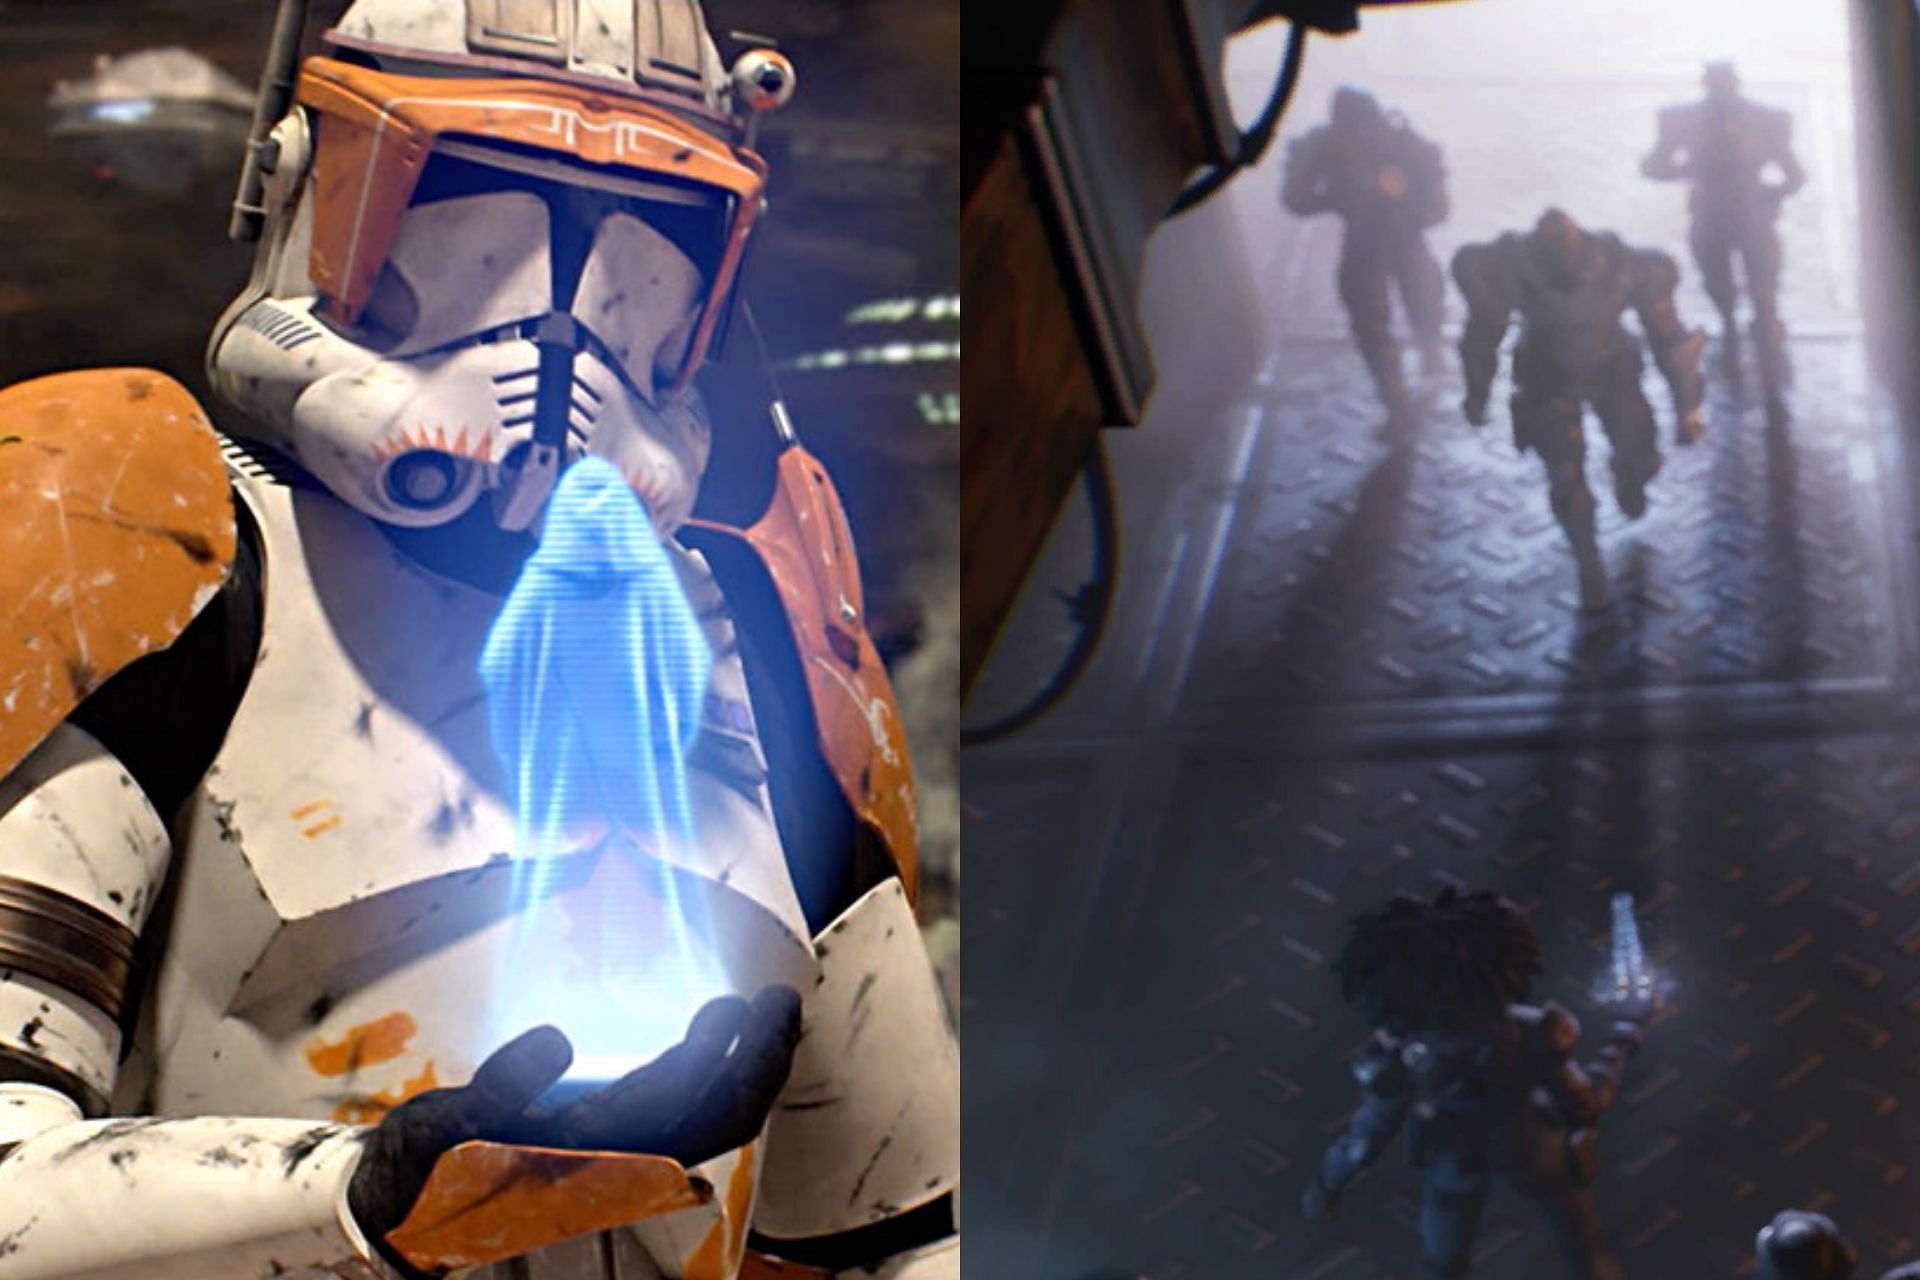 A Stormtrooper and Doctor Slone using the same holographic communication device (Image via Sportskeeda)